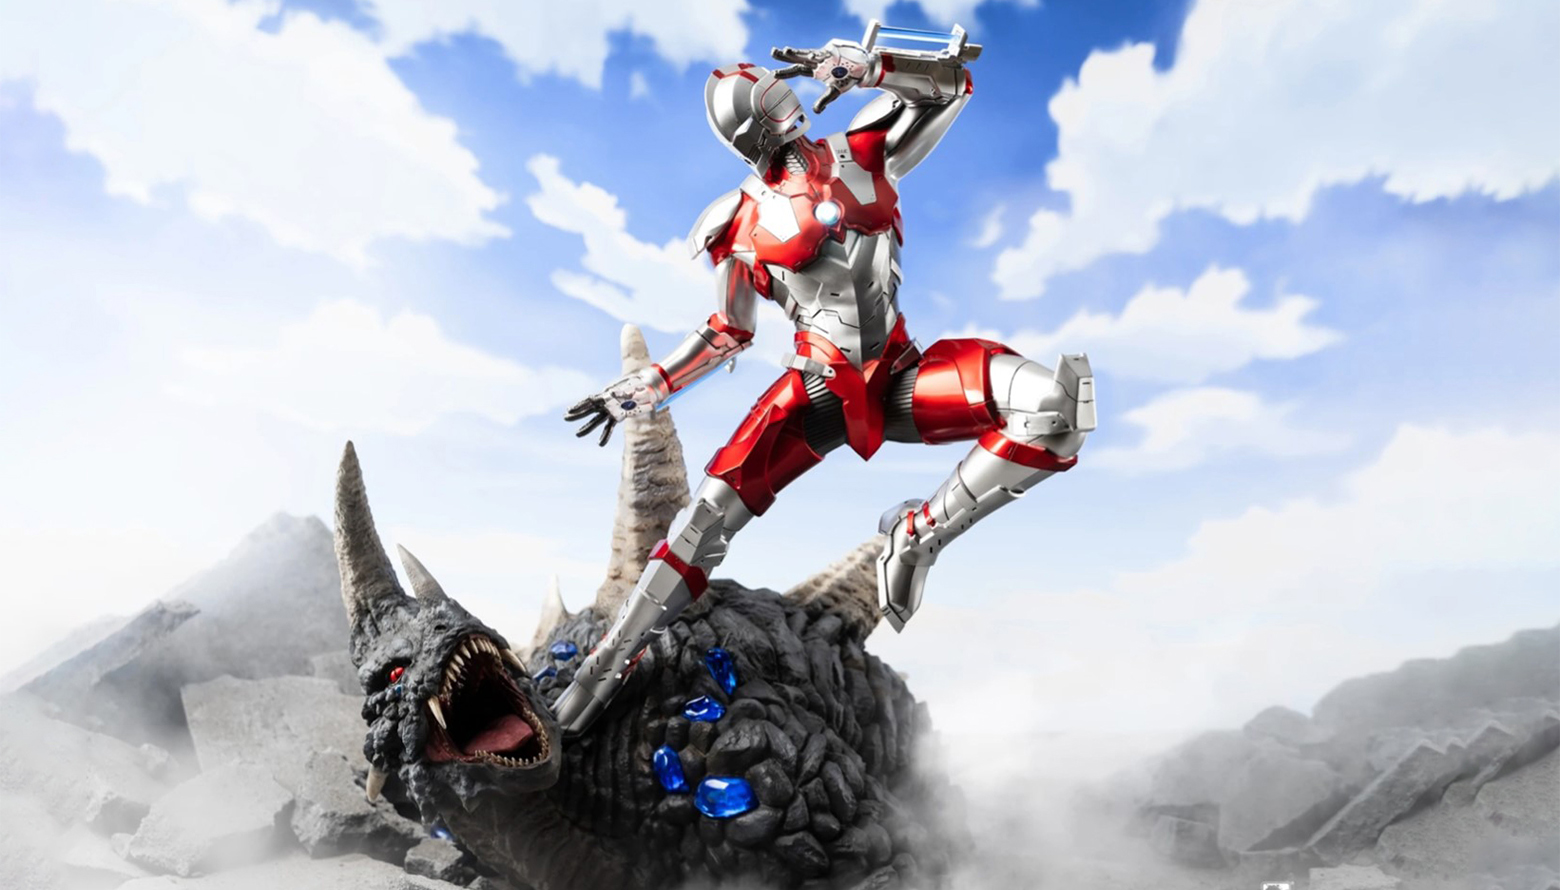 “ULTRAMAN RISING” GRAND PRIZE AT ANIME EXPO IS STUNNING PUREARTS STATUE